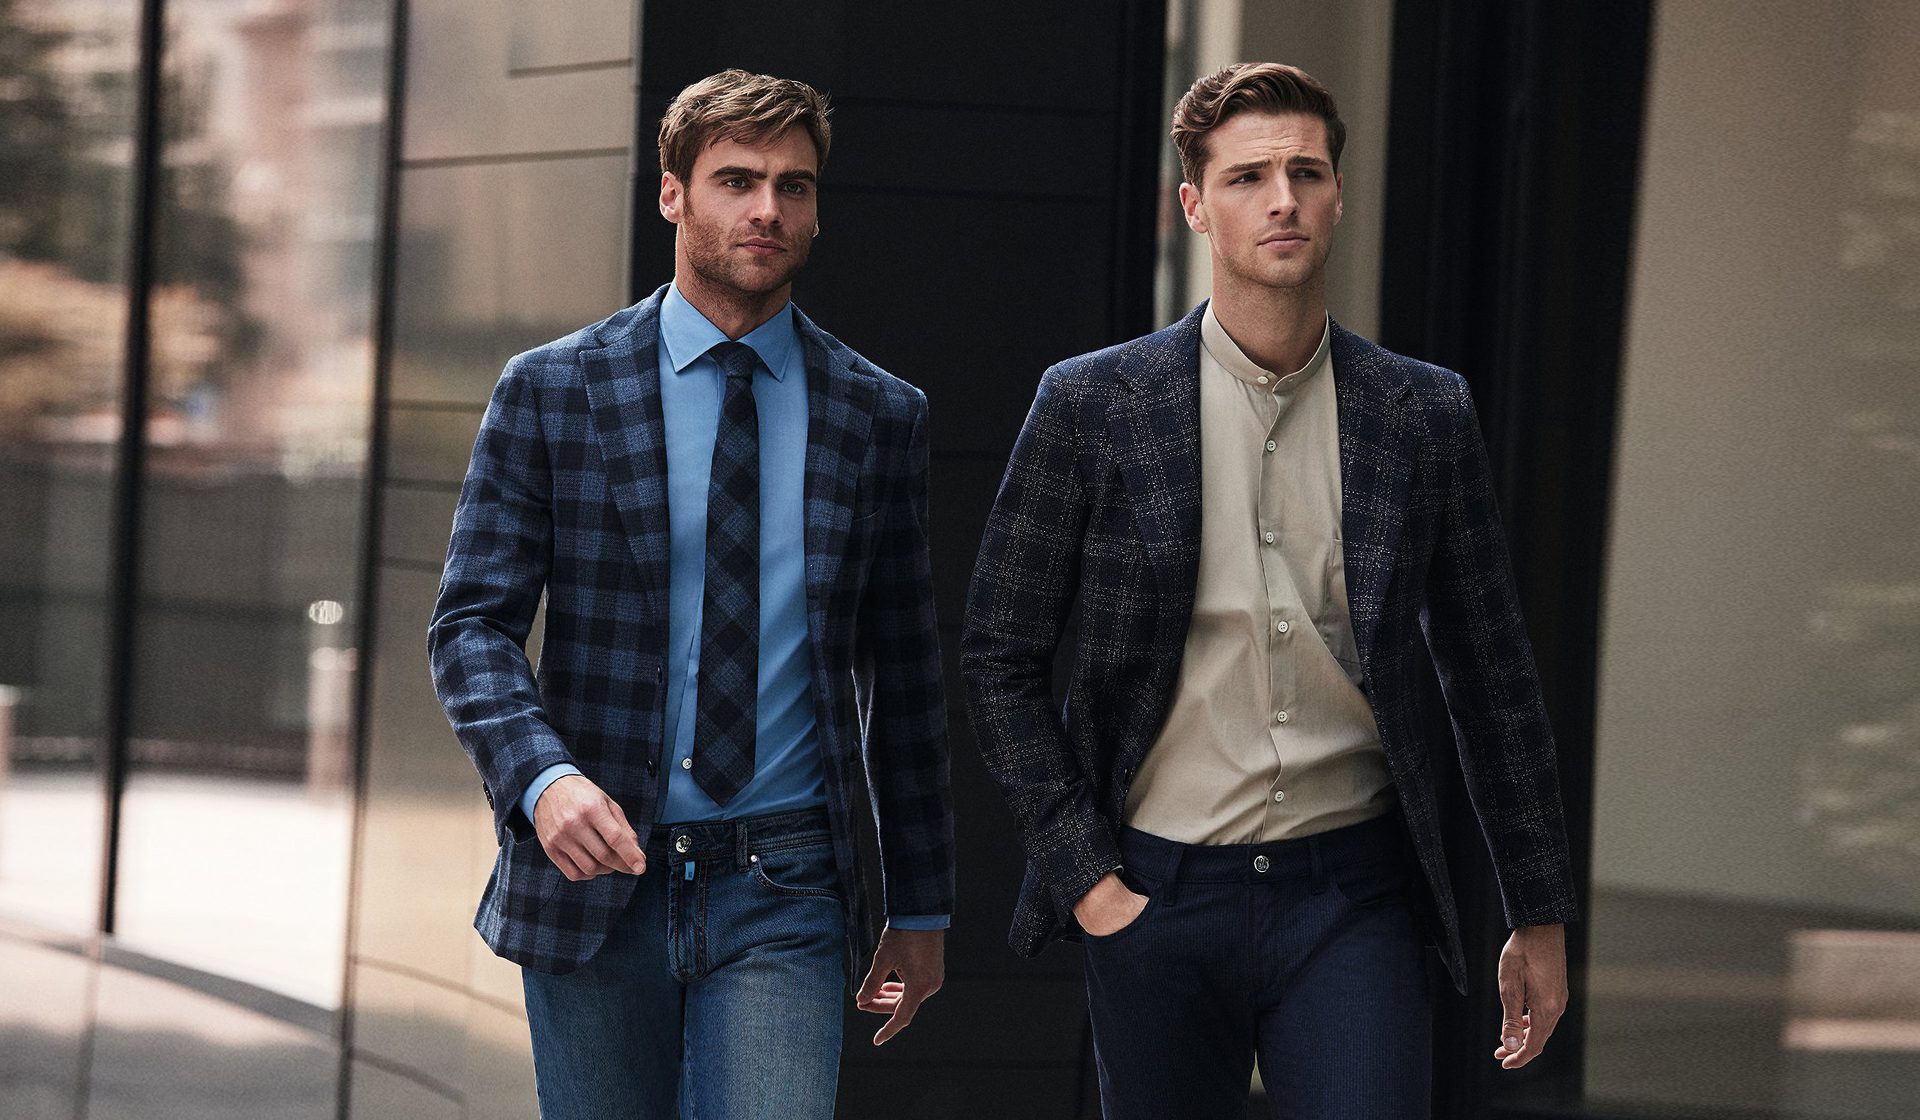 The Evolution of Workplace Attire: From Suits to Casual Chic